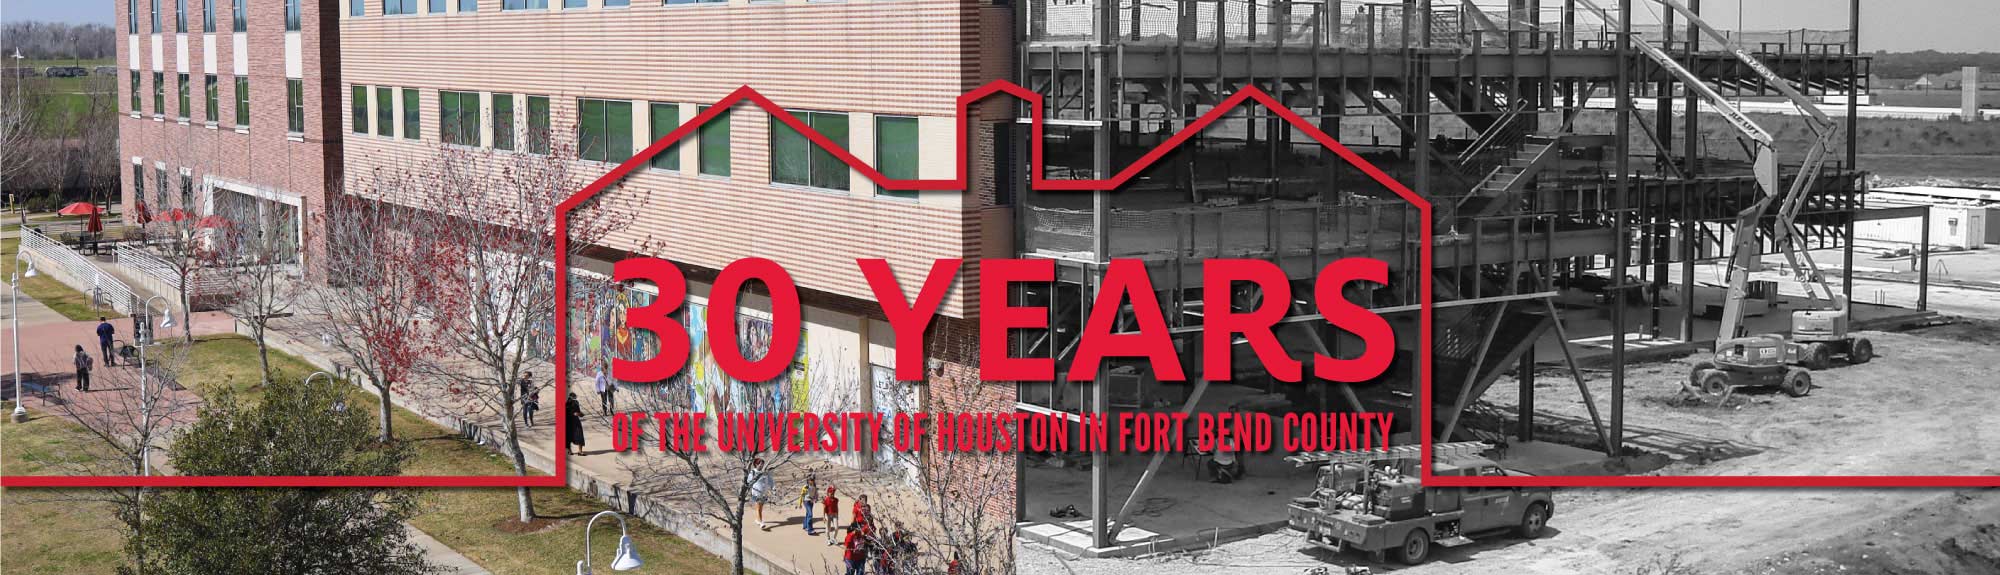 30 years of the University of Houston in Fort Bend County